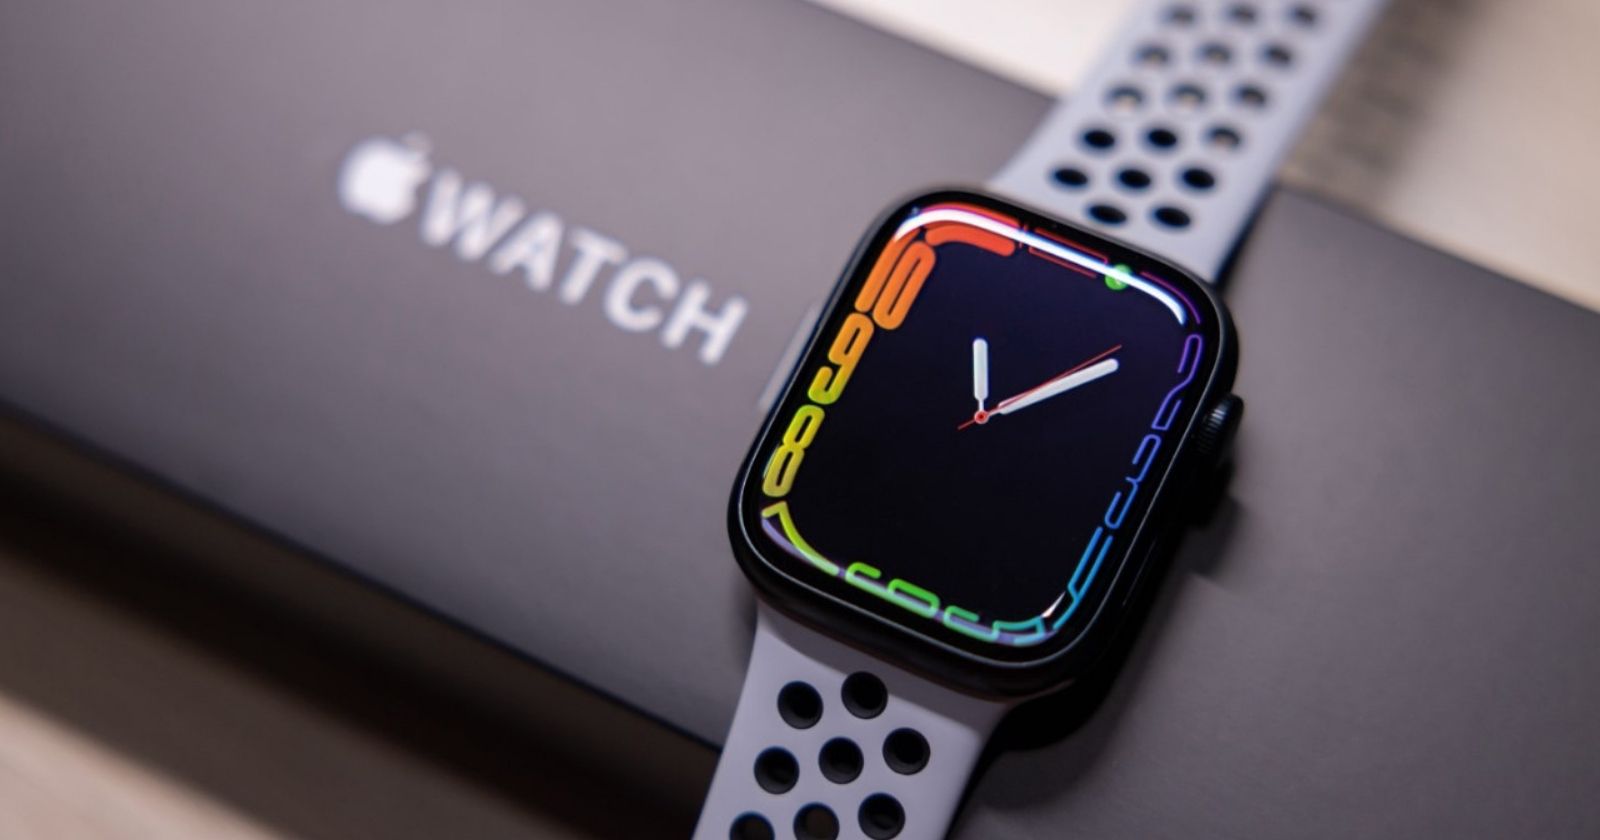 It almost came to Android. The canceled Apple Watch project was revealed!